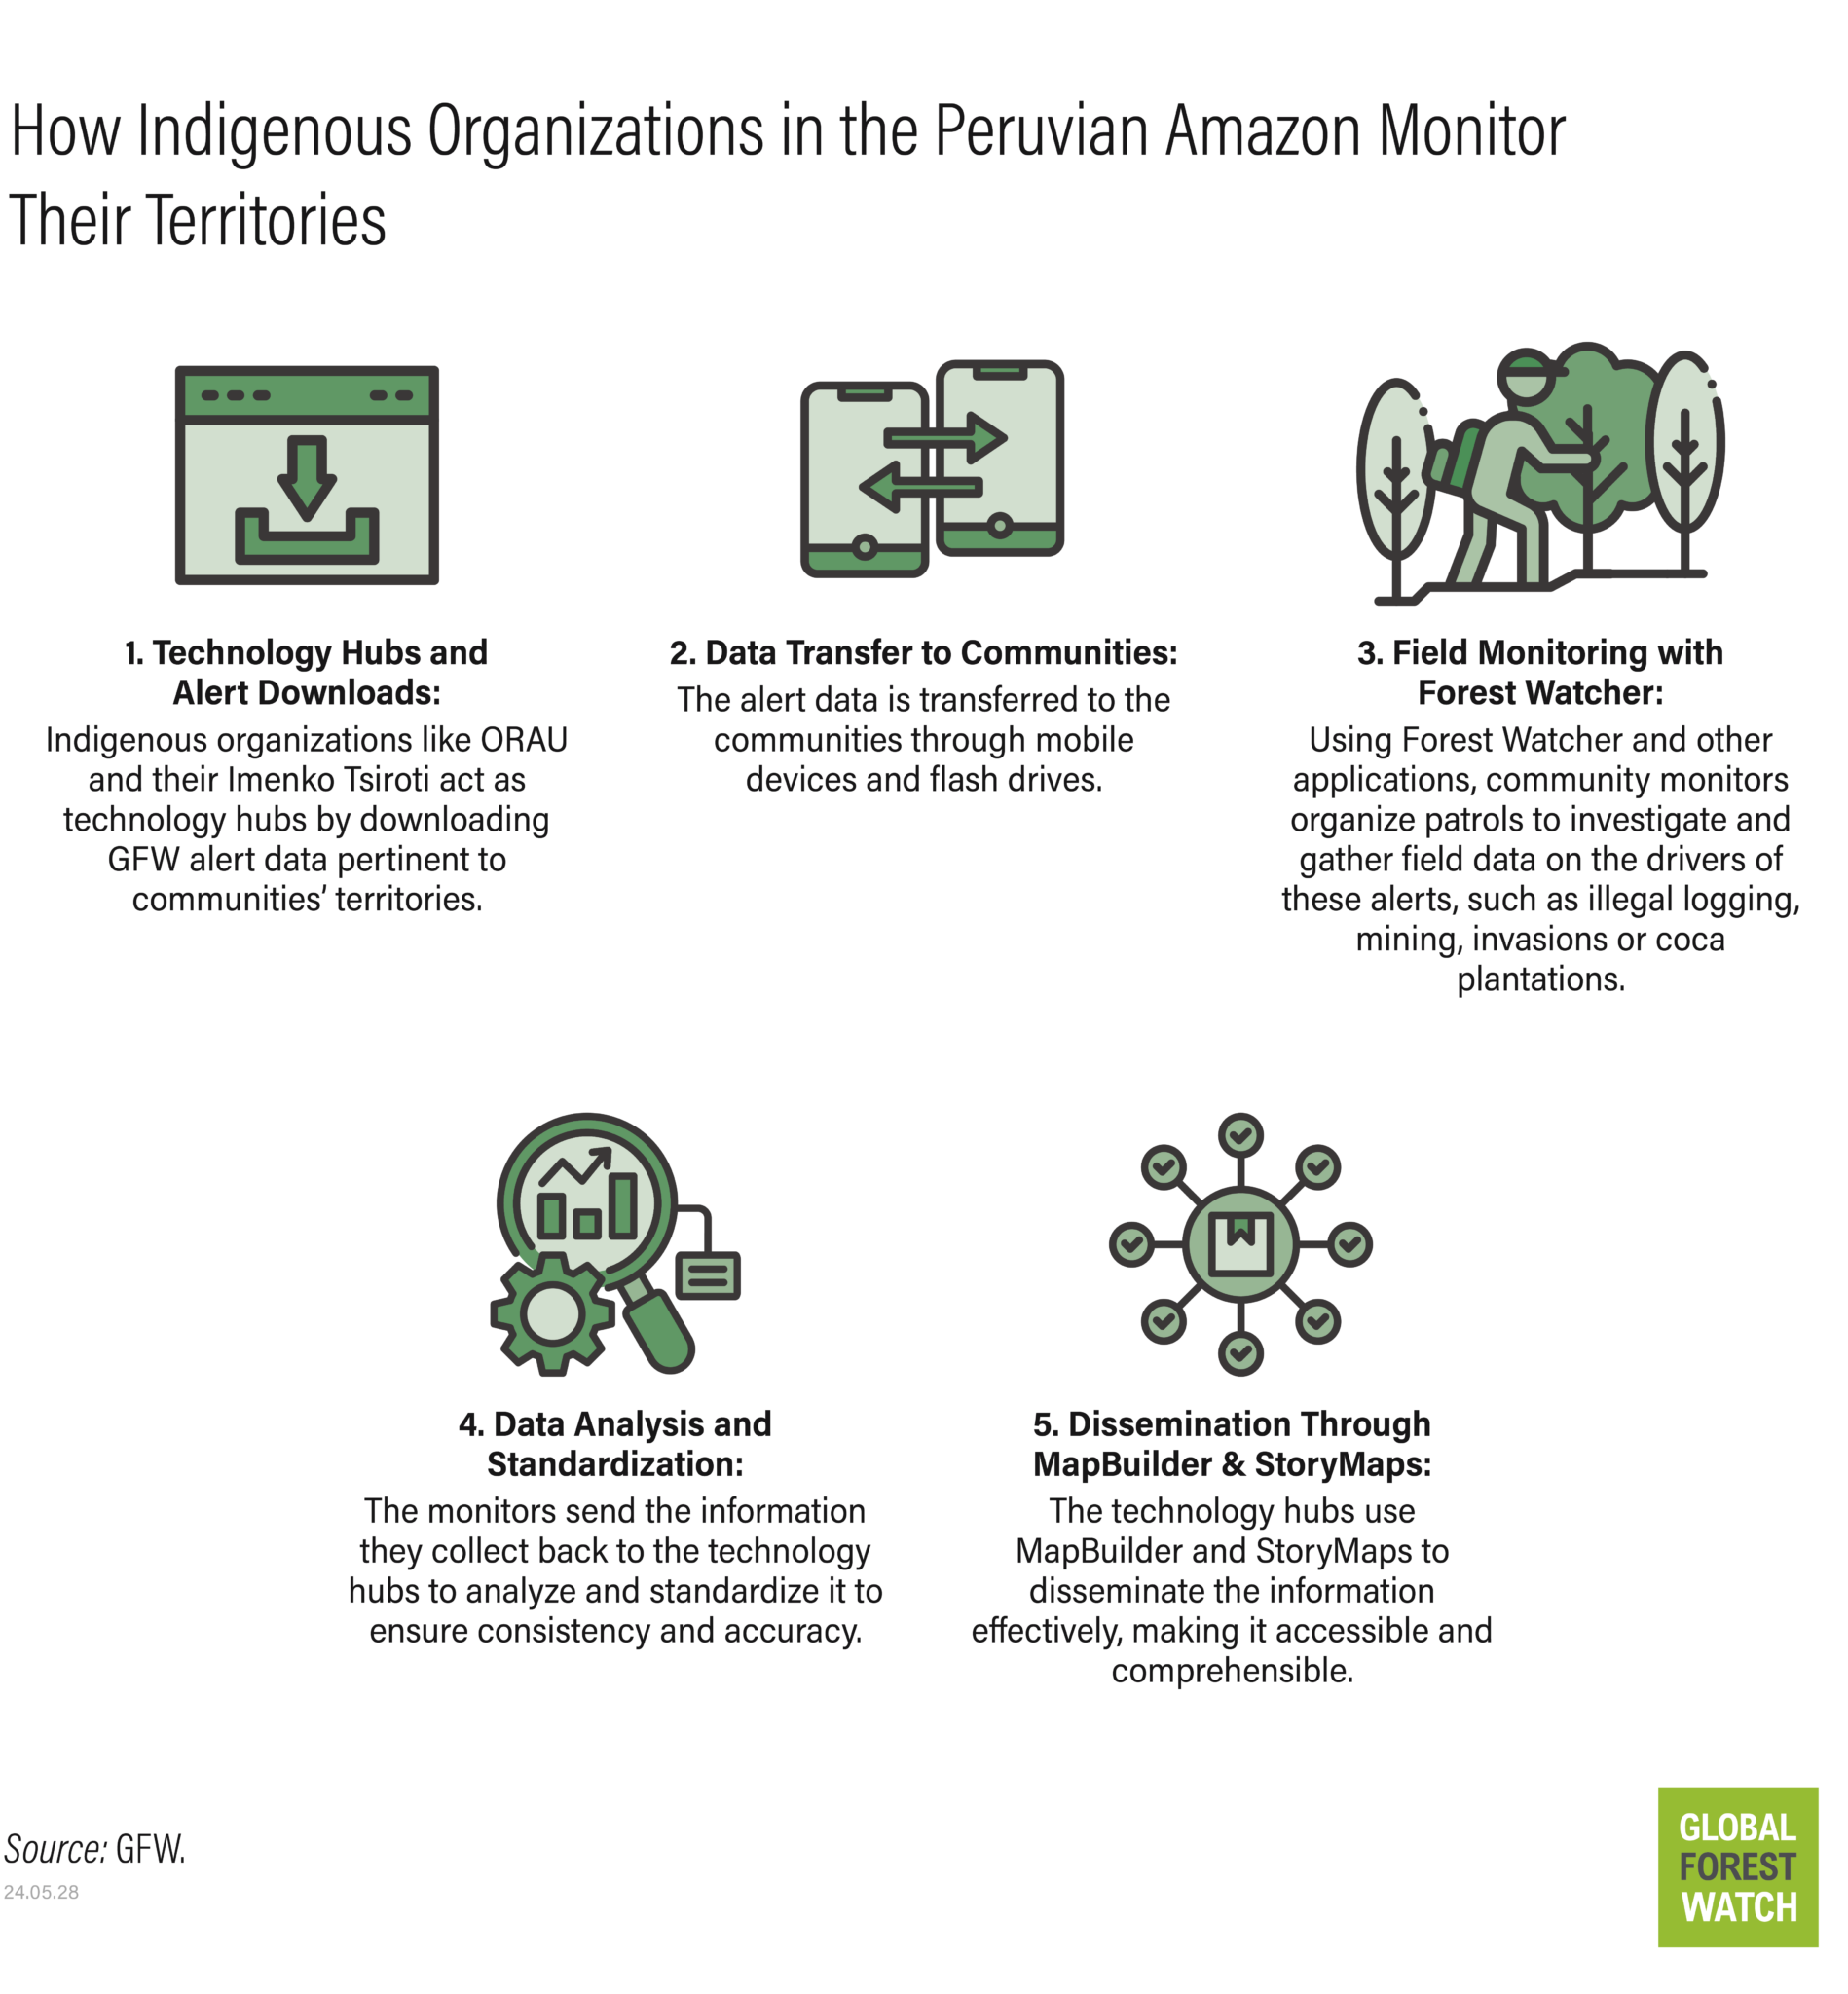 How indigenous organizations in the Peruvian Amazon monitor their territories